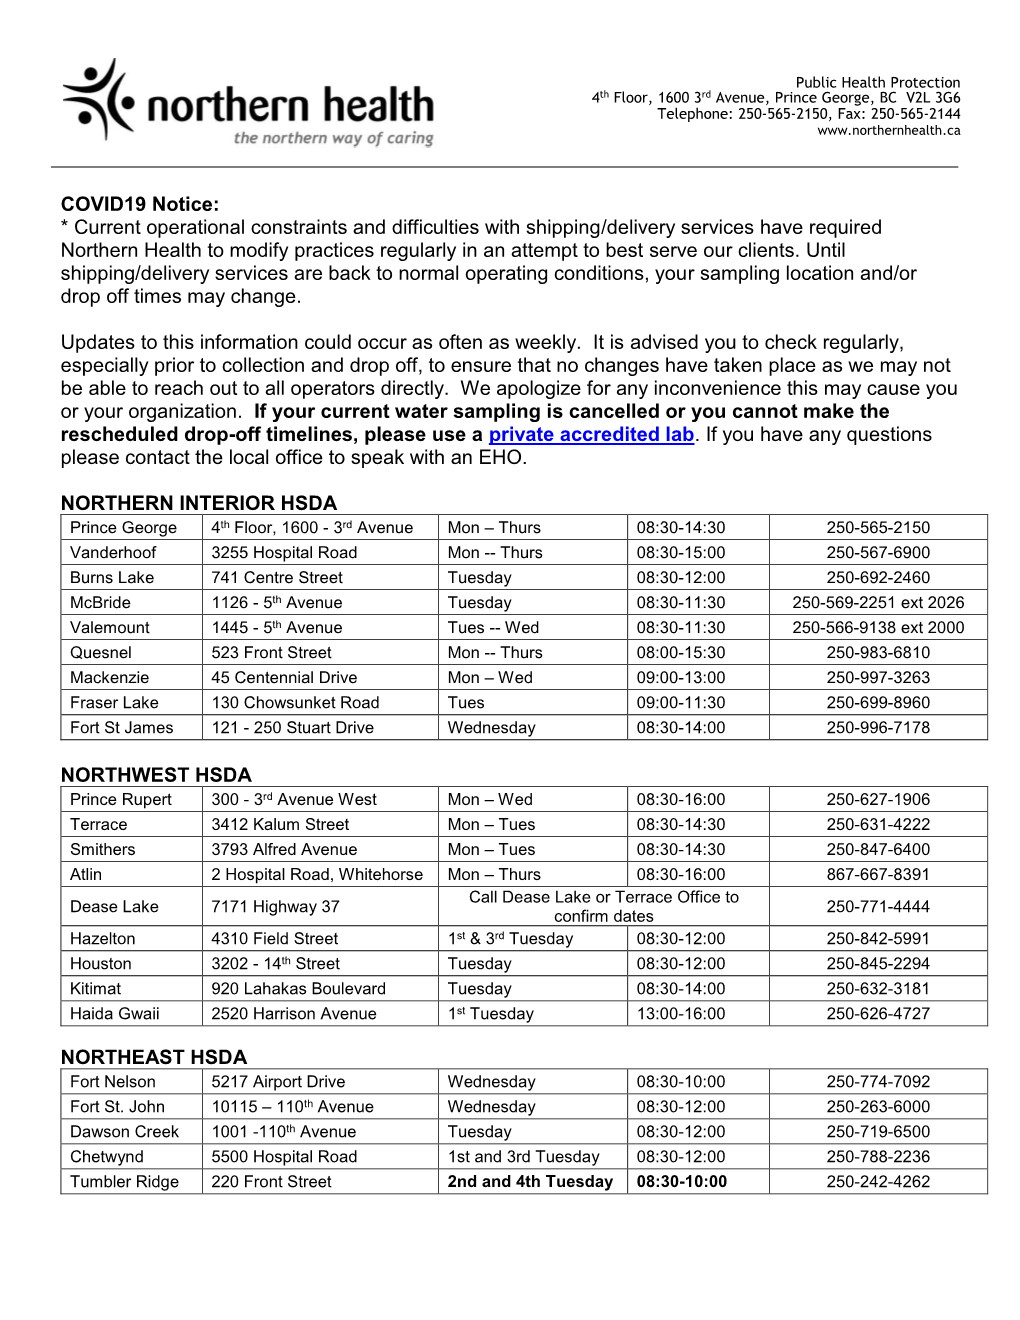 Water Sampling Drop-Off Locations and Times